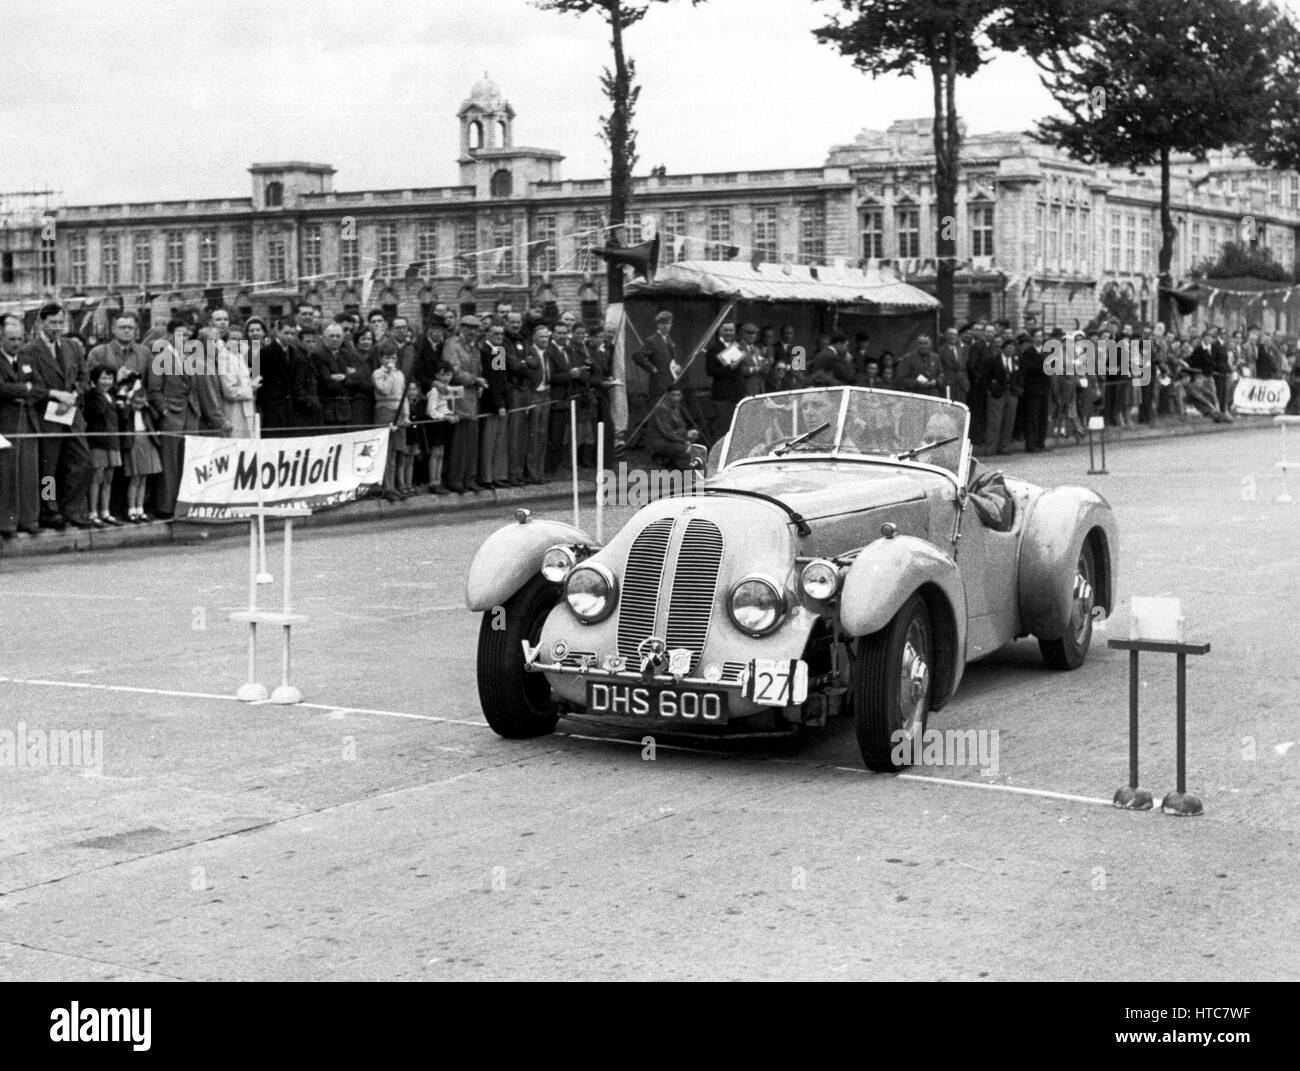 12 luglio 1952 rally gallese. 1947 Healey 2.4 speciale. G.A. Lewis Foto Stock